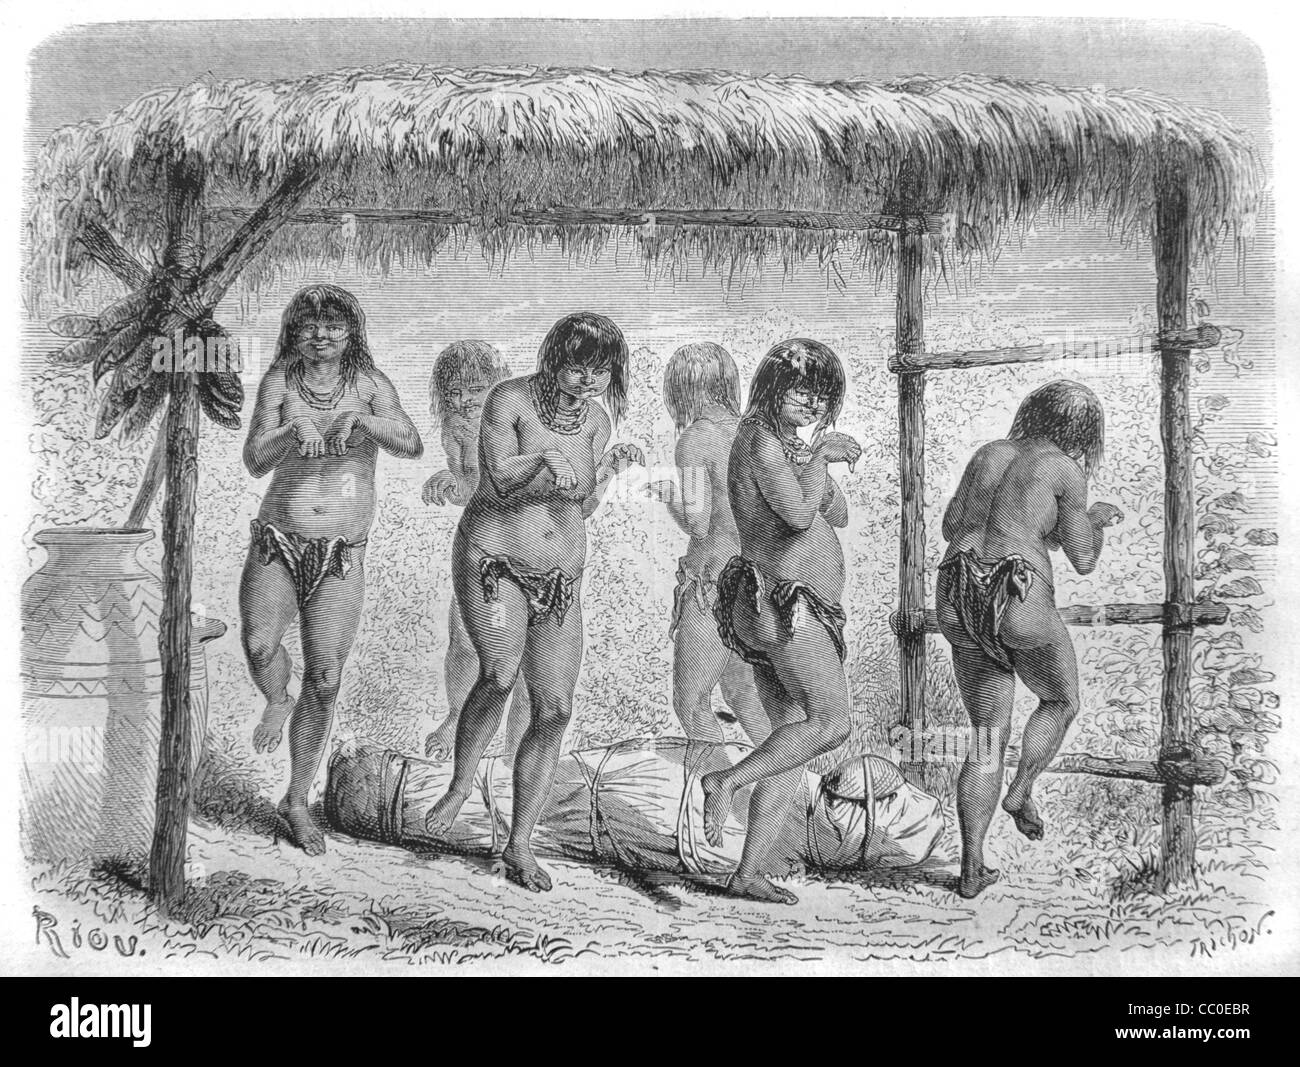 Burial, Funeral or Funerary Dance of Native American Indians or Indigenous Natives, Costa Rica, Central America, 1864 Engraving Stock Photo